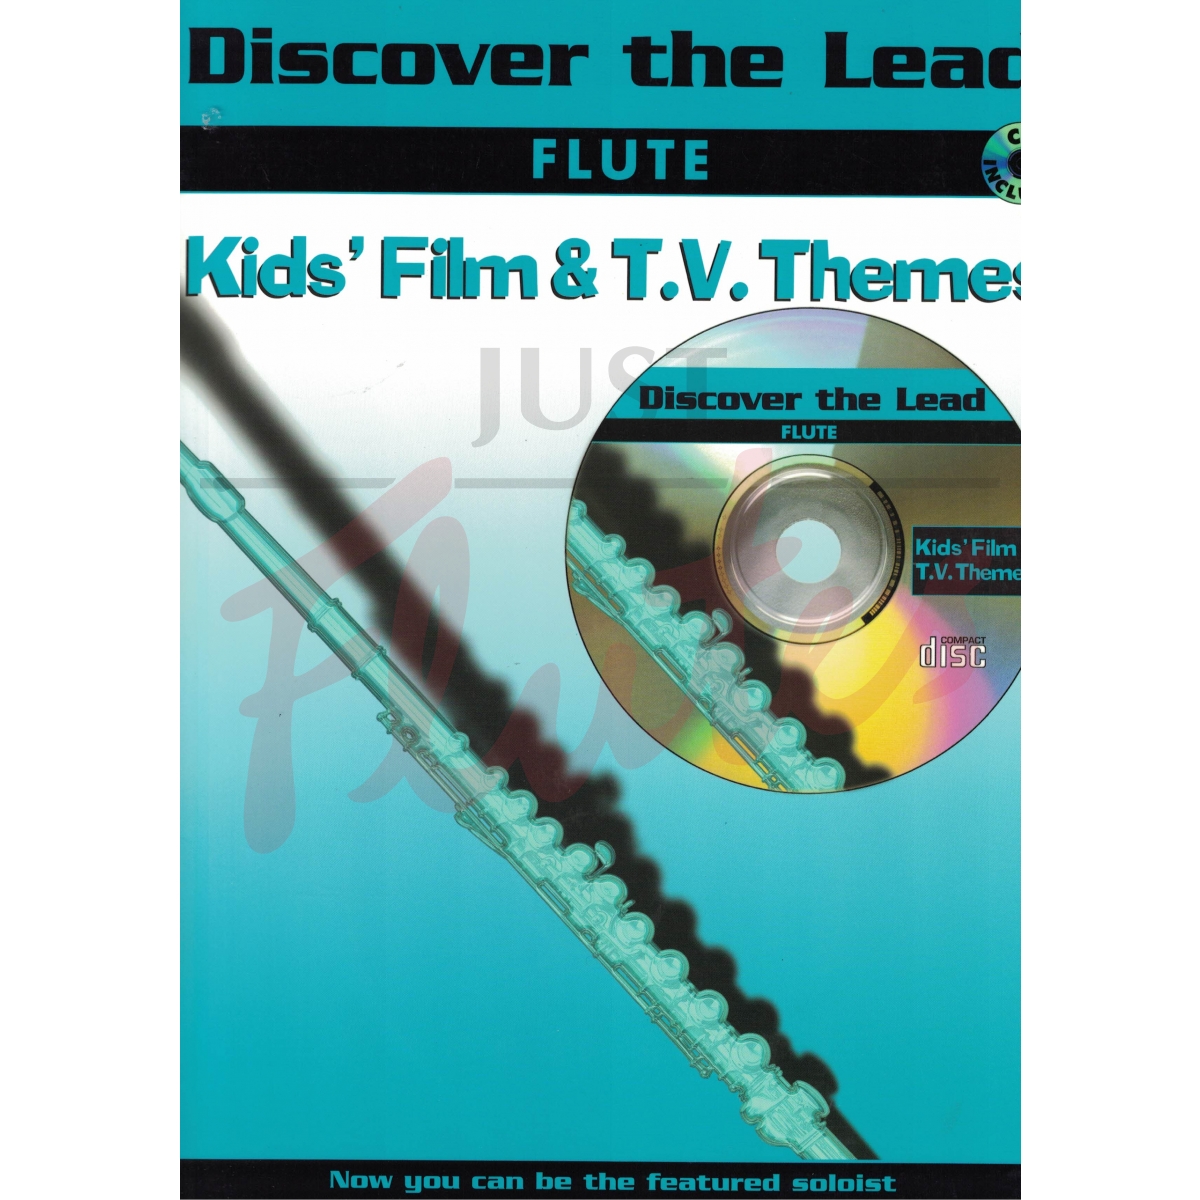 Take the Lead: Kid's Film and TV Themes [Flute]